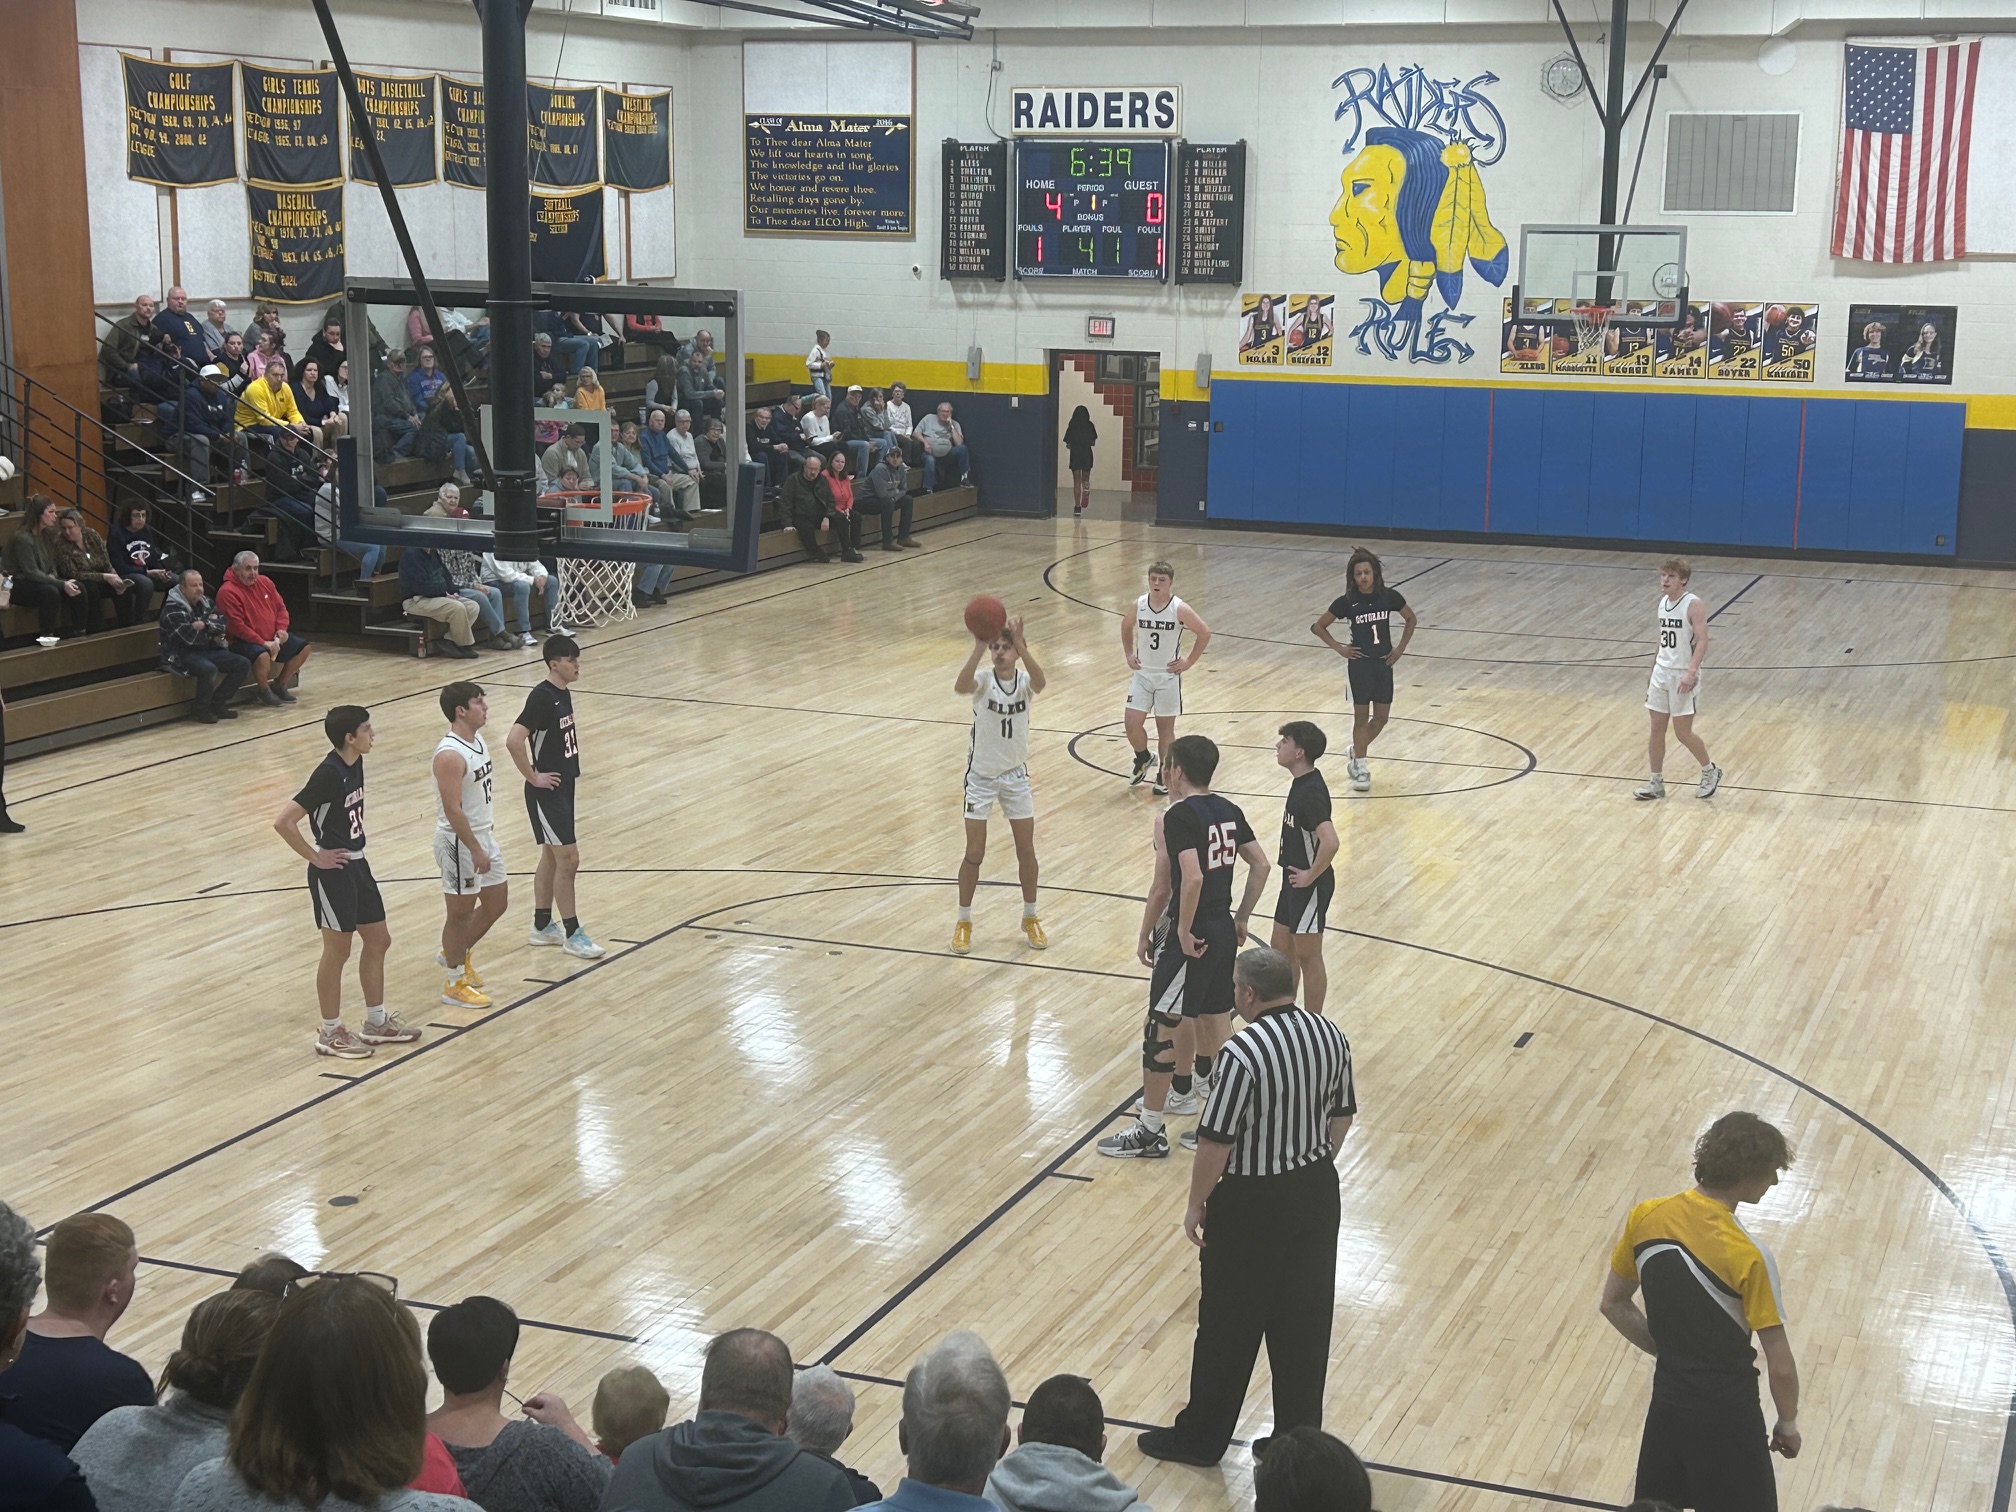 ELCO Finds Team Win ‘Pretty Cool’ As Raiders Withstand Persistent Octorara Challenges, Sets Up Mammoth Regular Season Finale At Home Against Donegal With Postseason Berth Still Within Reach